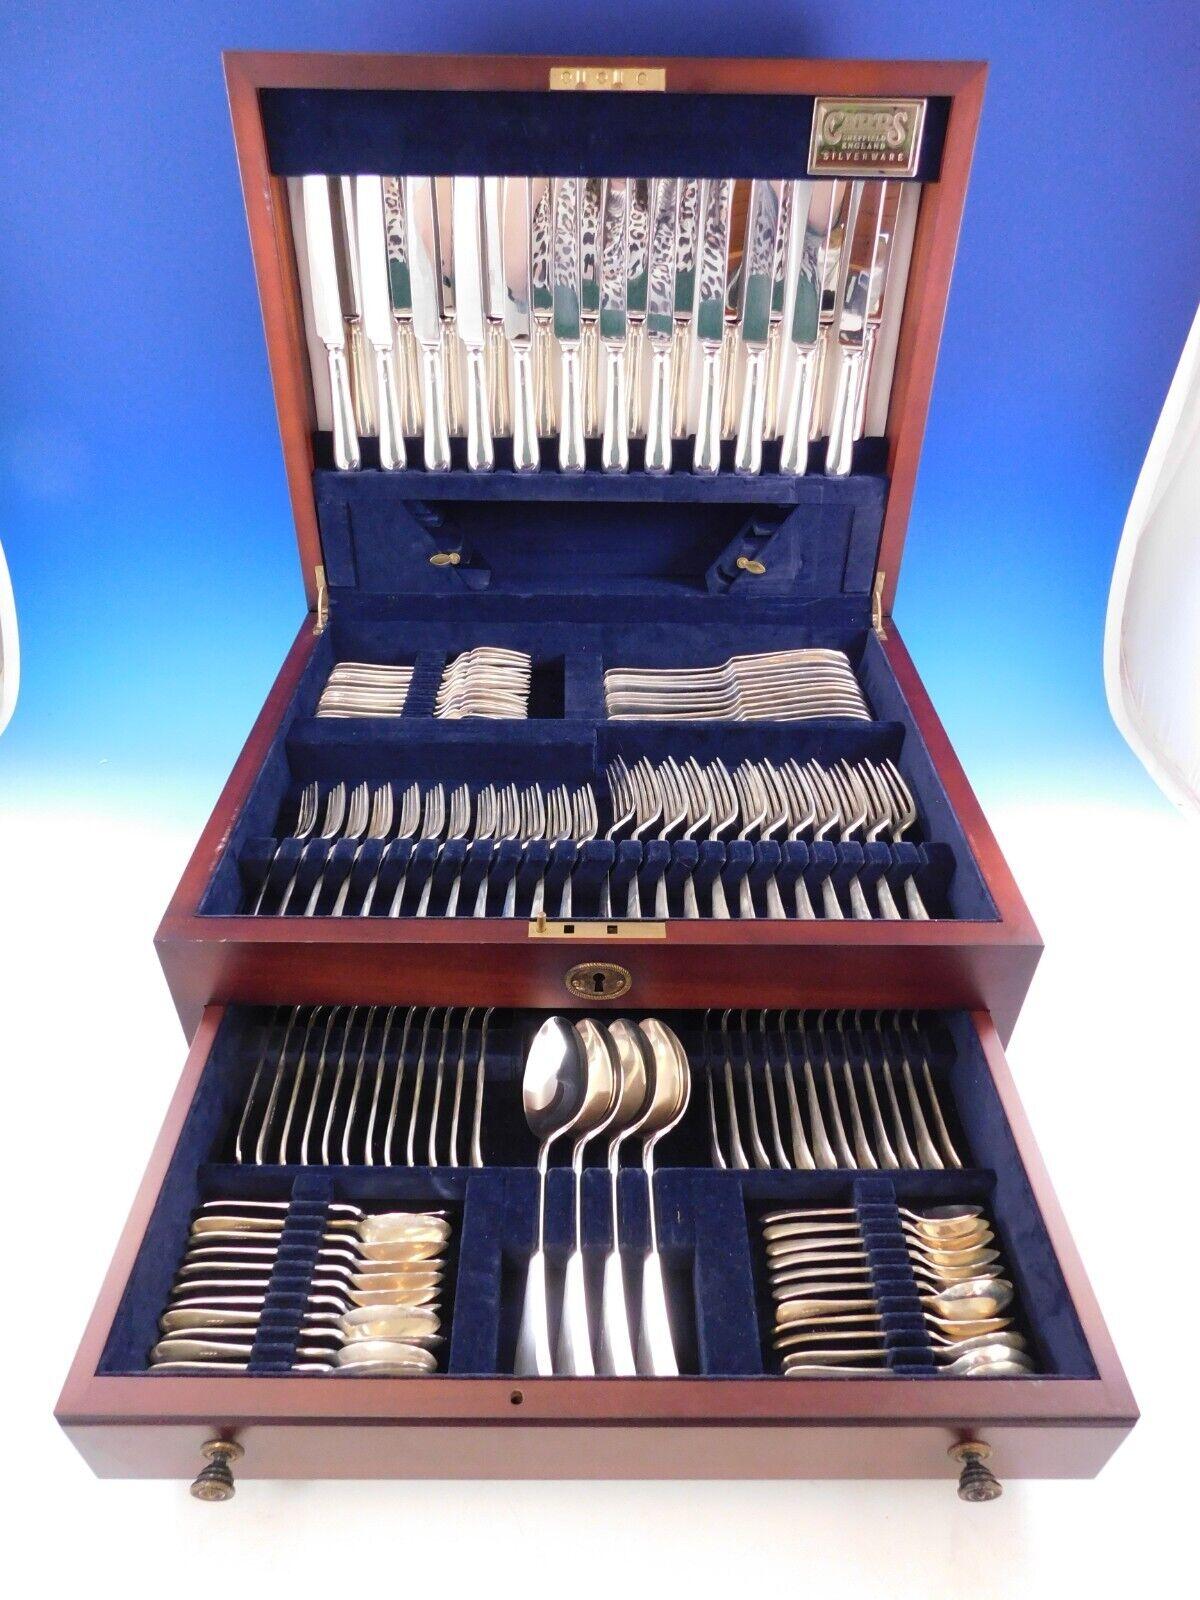 Outstanding Old English by Carrs - Sheffield England Sterling Silver Flatware set - 124 pieces. These pieces have great weight and show very little signs of use. This set includes:

12 Dinner Knives, 9 3/4